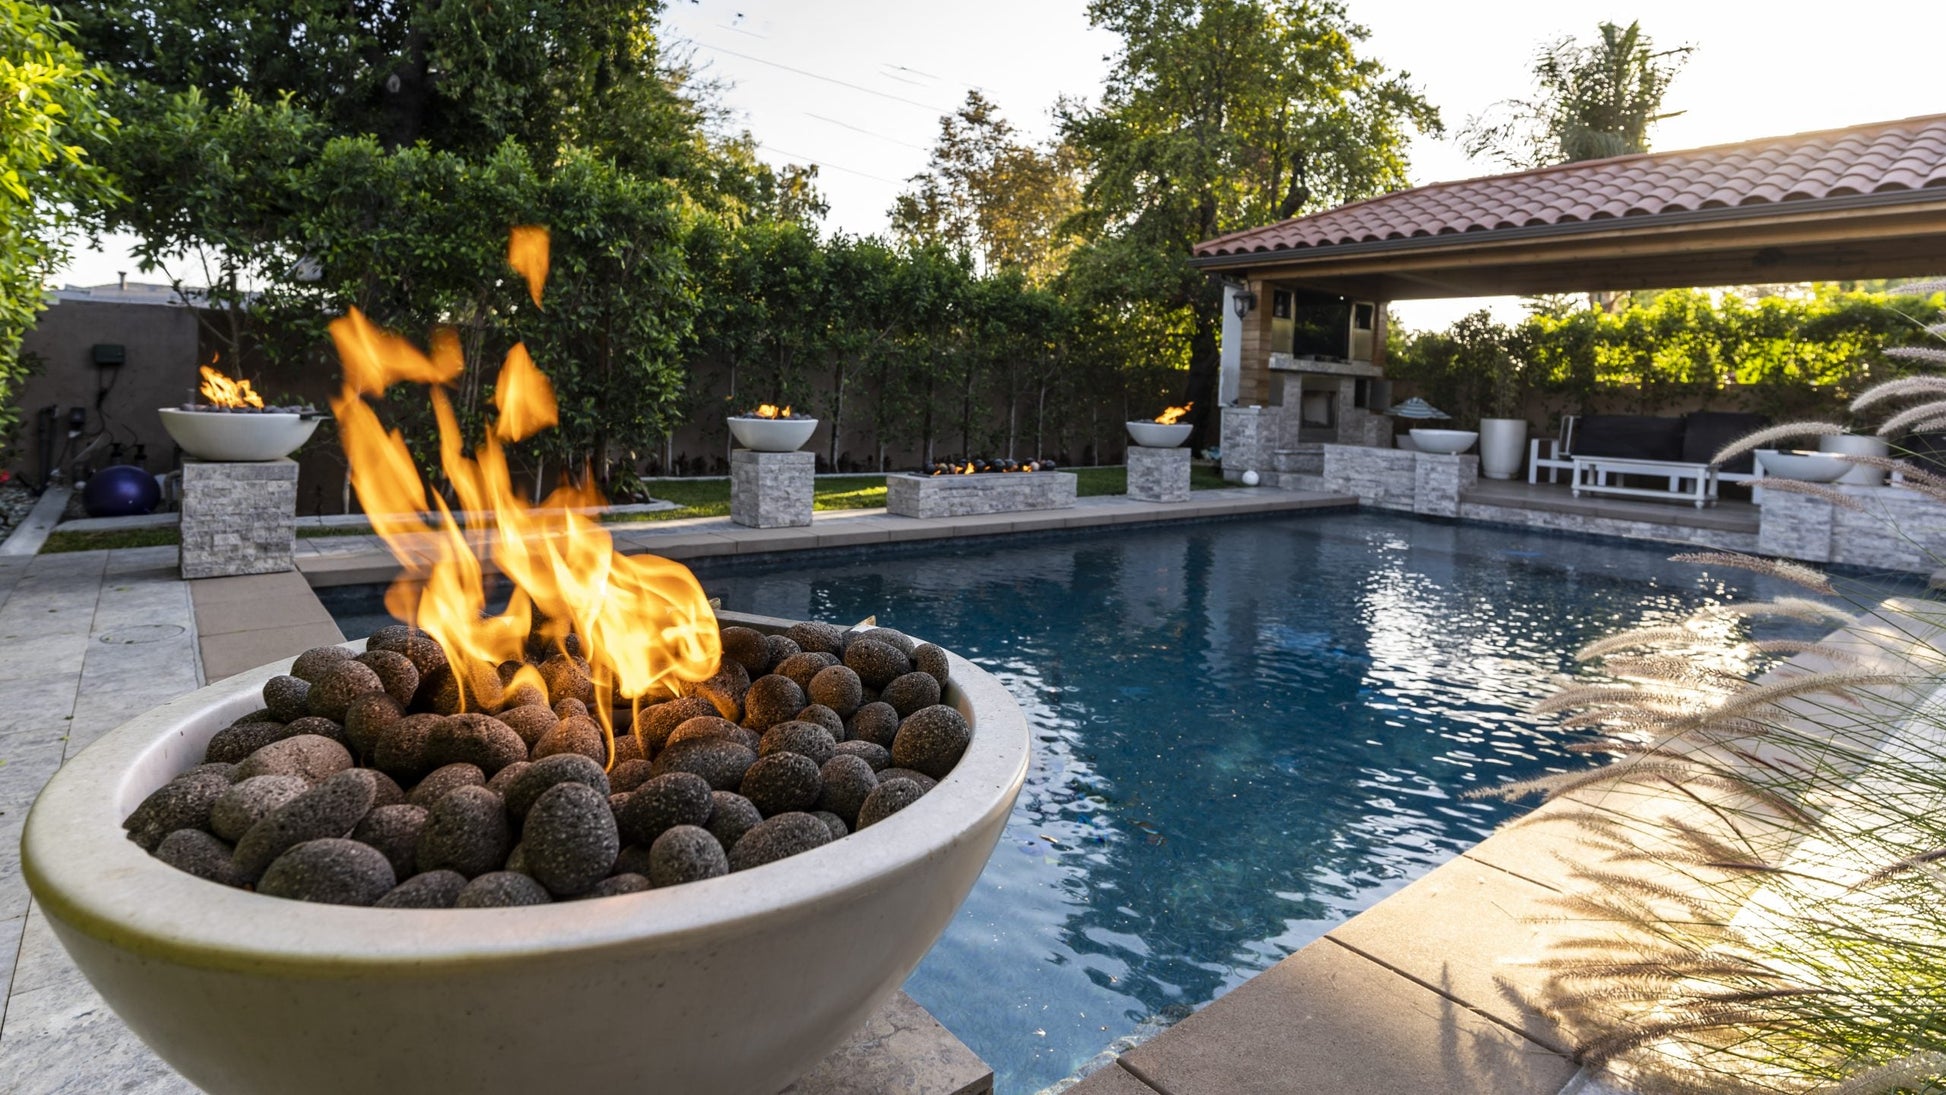 The Outdoor Plus Round Luna 30" Metallic Pearl GFRC Concrete Natural Gas Fire Bowl with Match Lit with Flame Sense Ignition